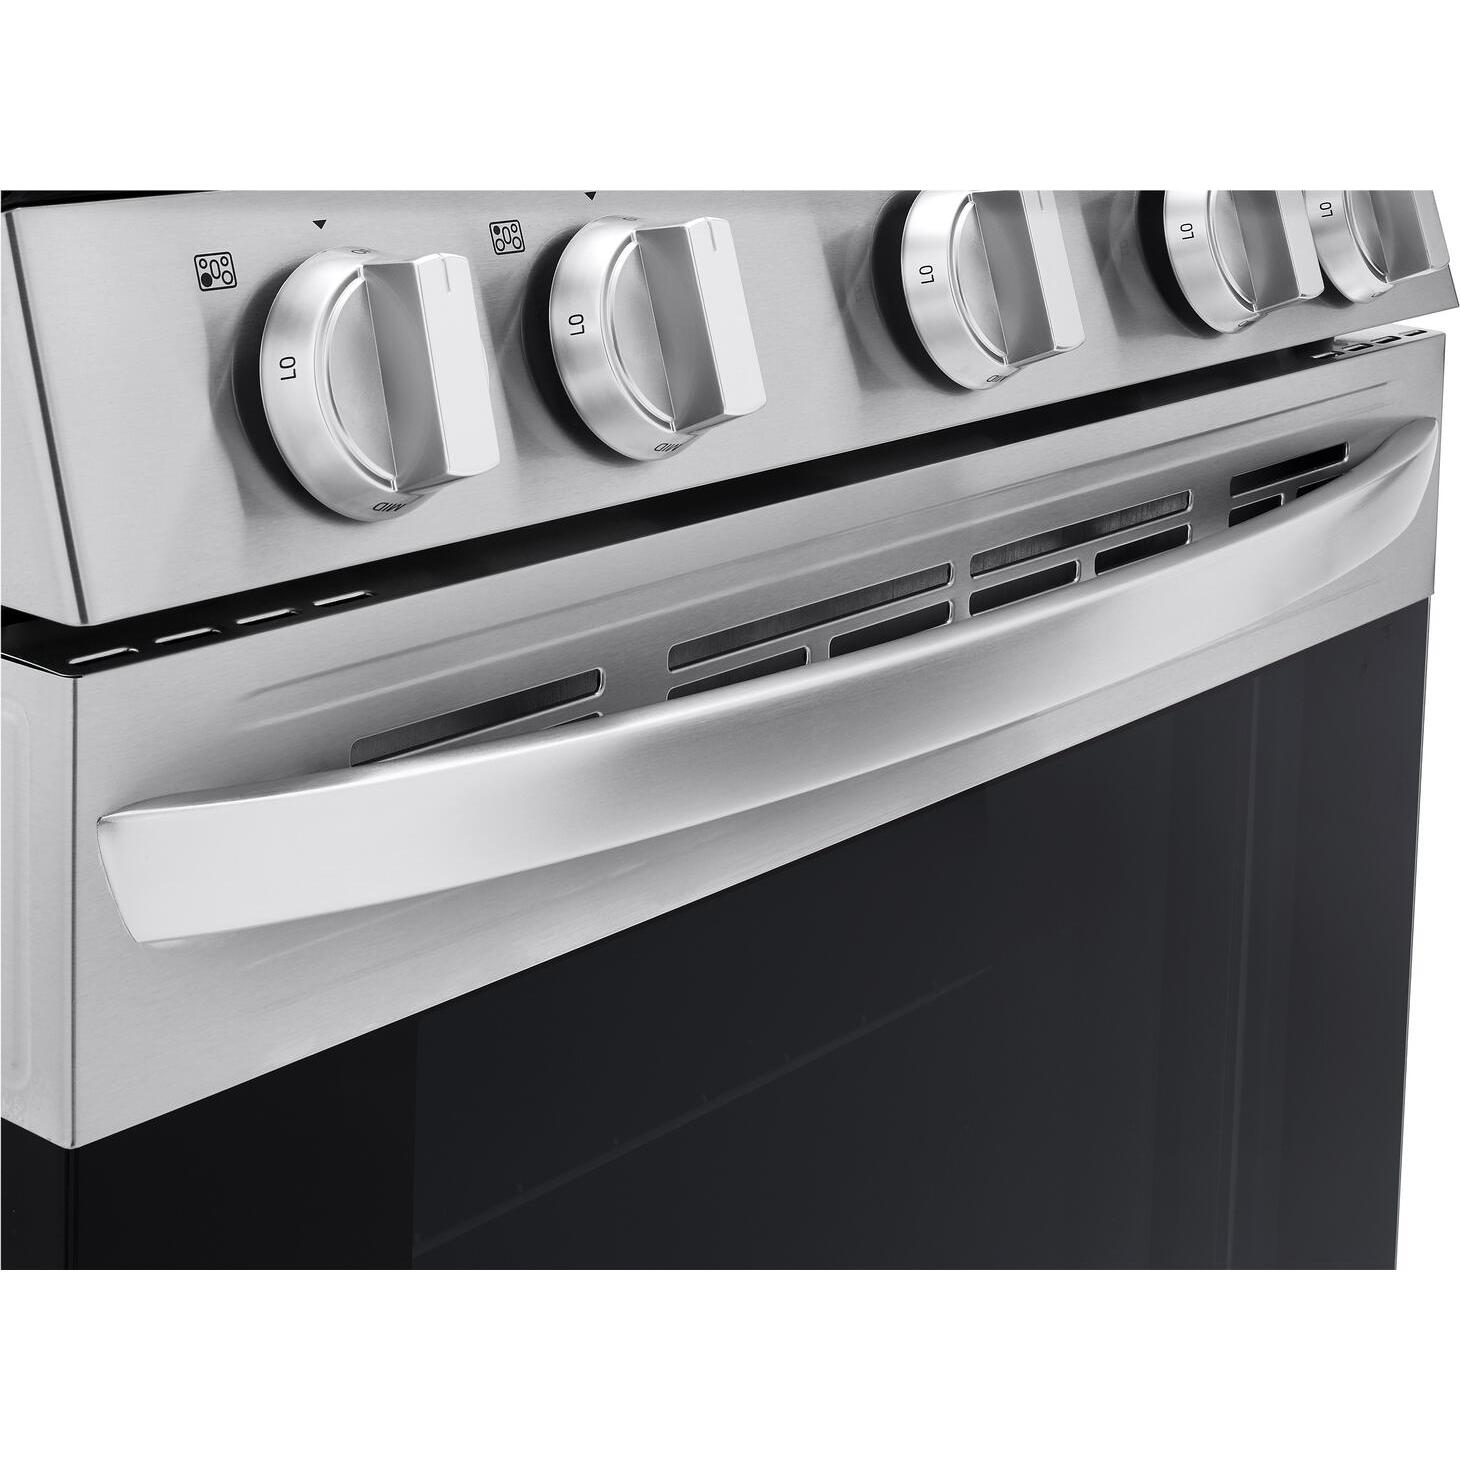 LG 30-inch Freestanding Gas Range with EasyClean? LRGL5821S